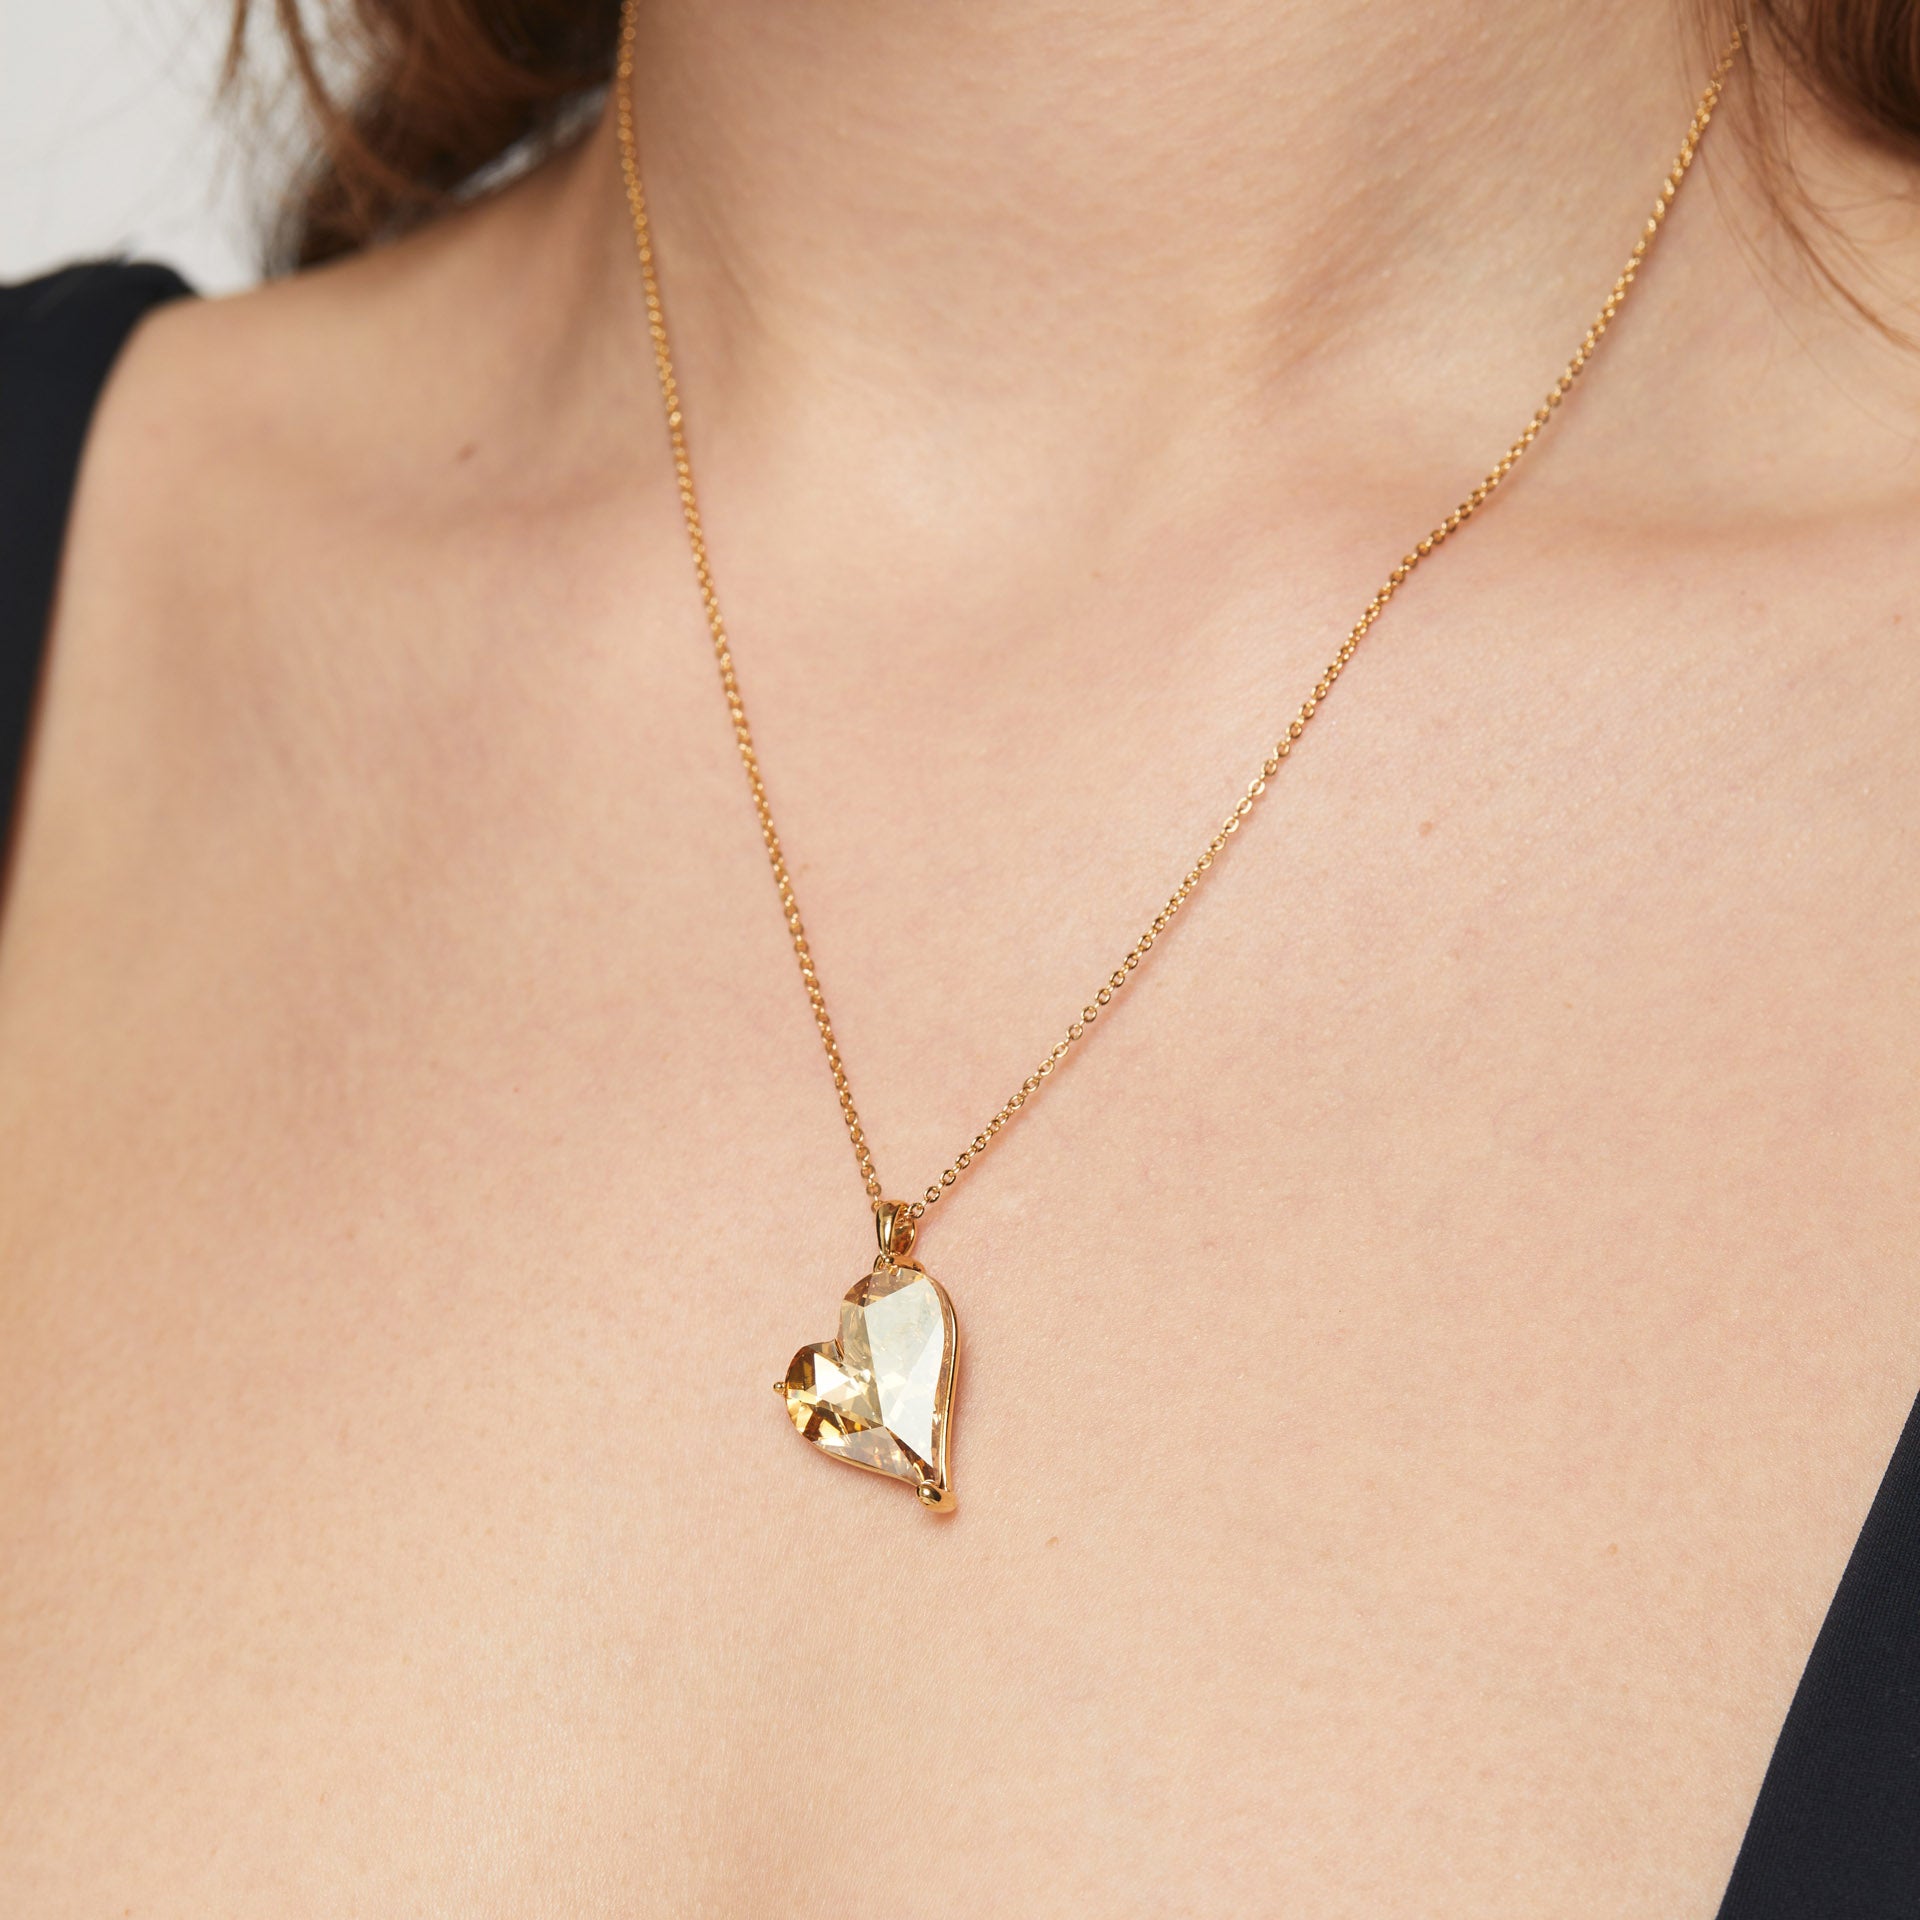 Big Heart gold necklace